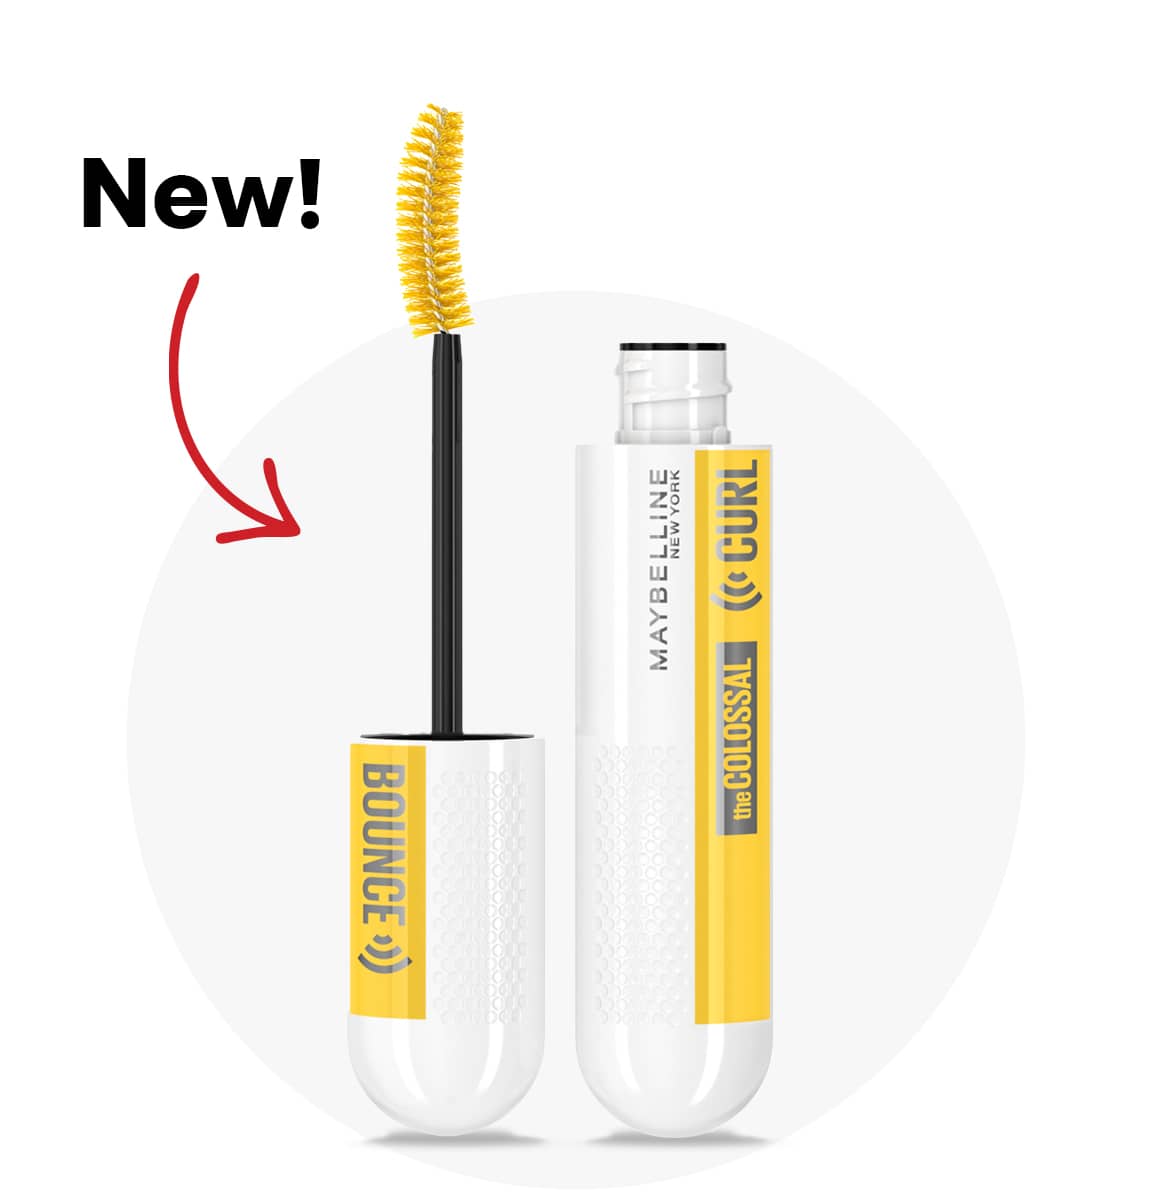 Shop for Maybelline Colossal Curl mascara, new!